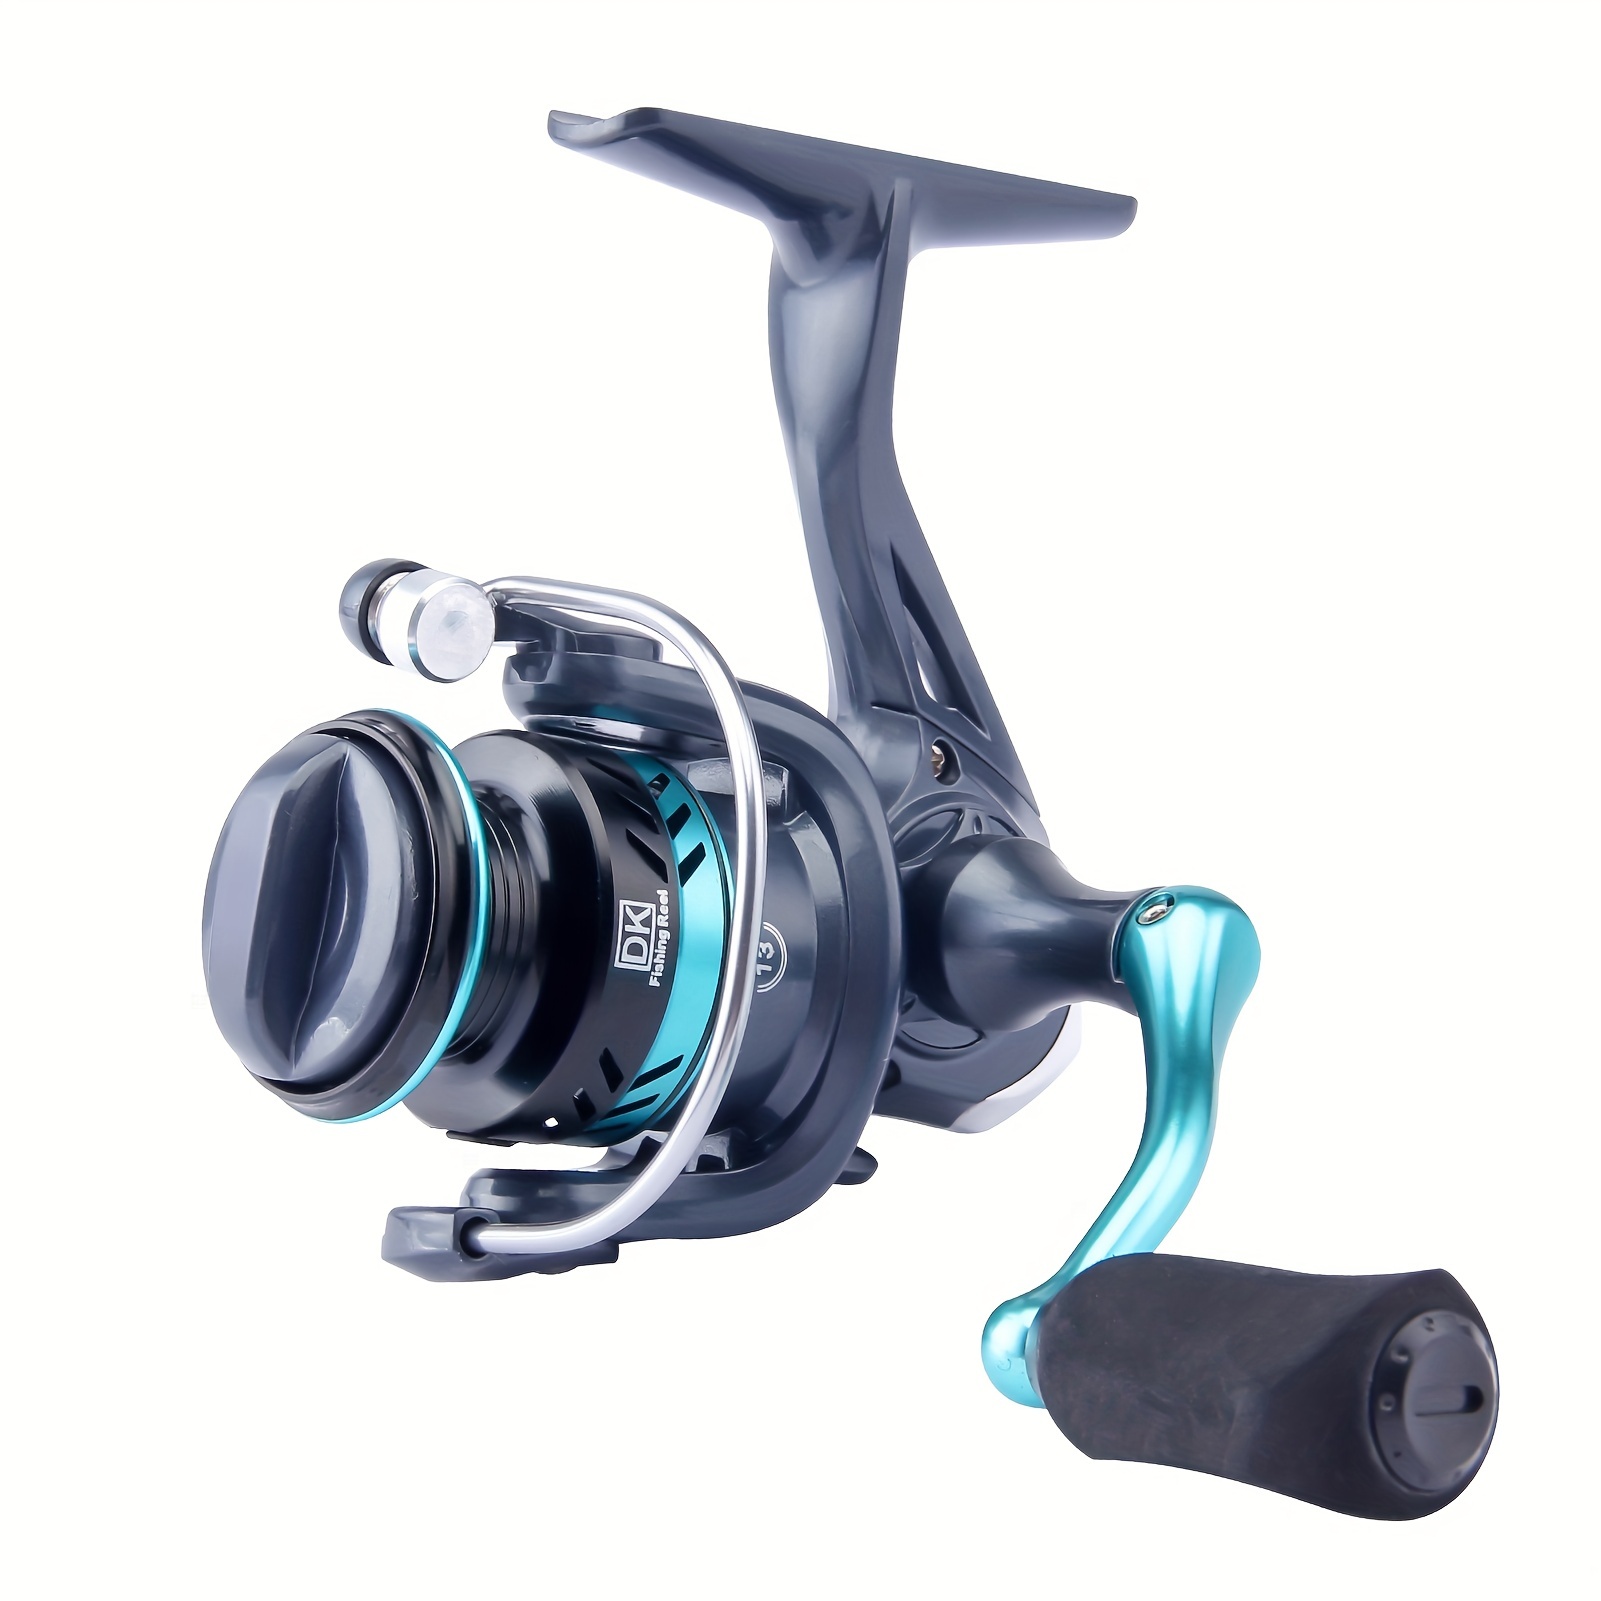 

The Ultimate Fishing Reel For Saltwater, Freshwater & Ice Fishing - Up To 7000 Spinning, 35lb Max Drag!